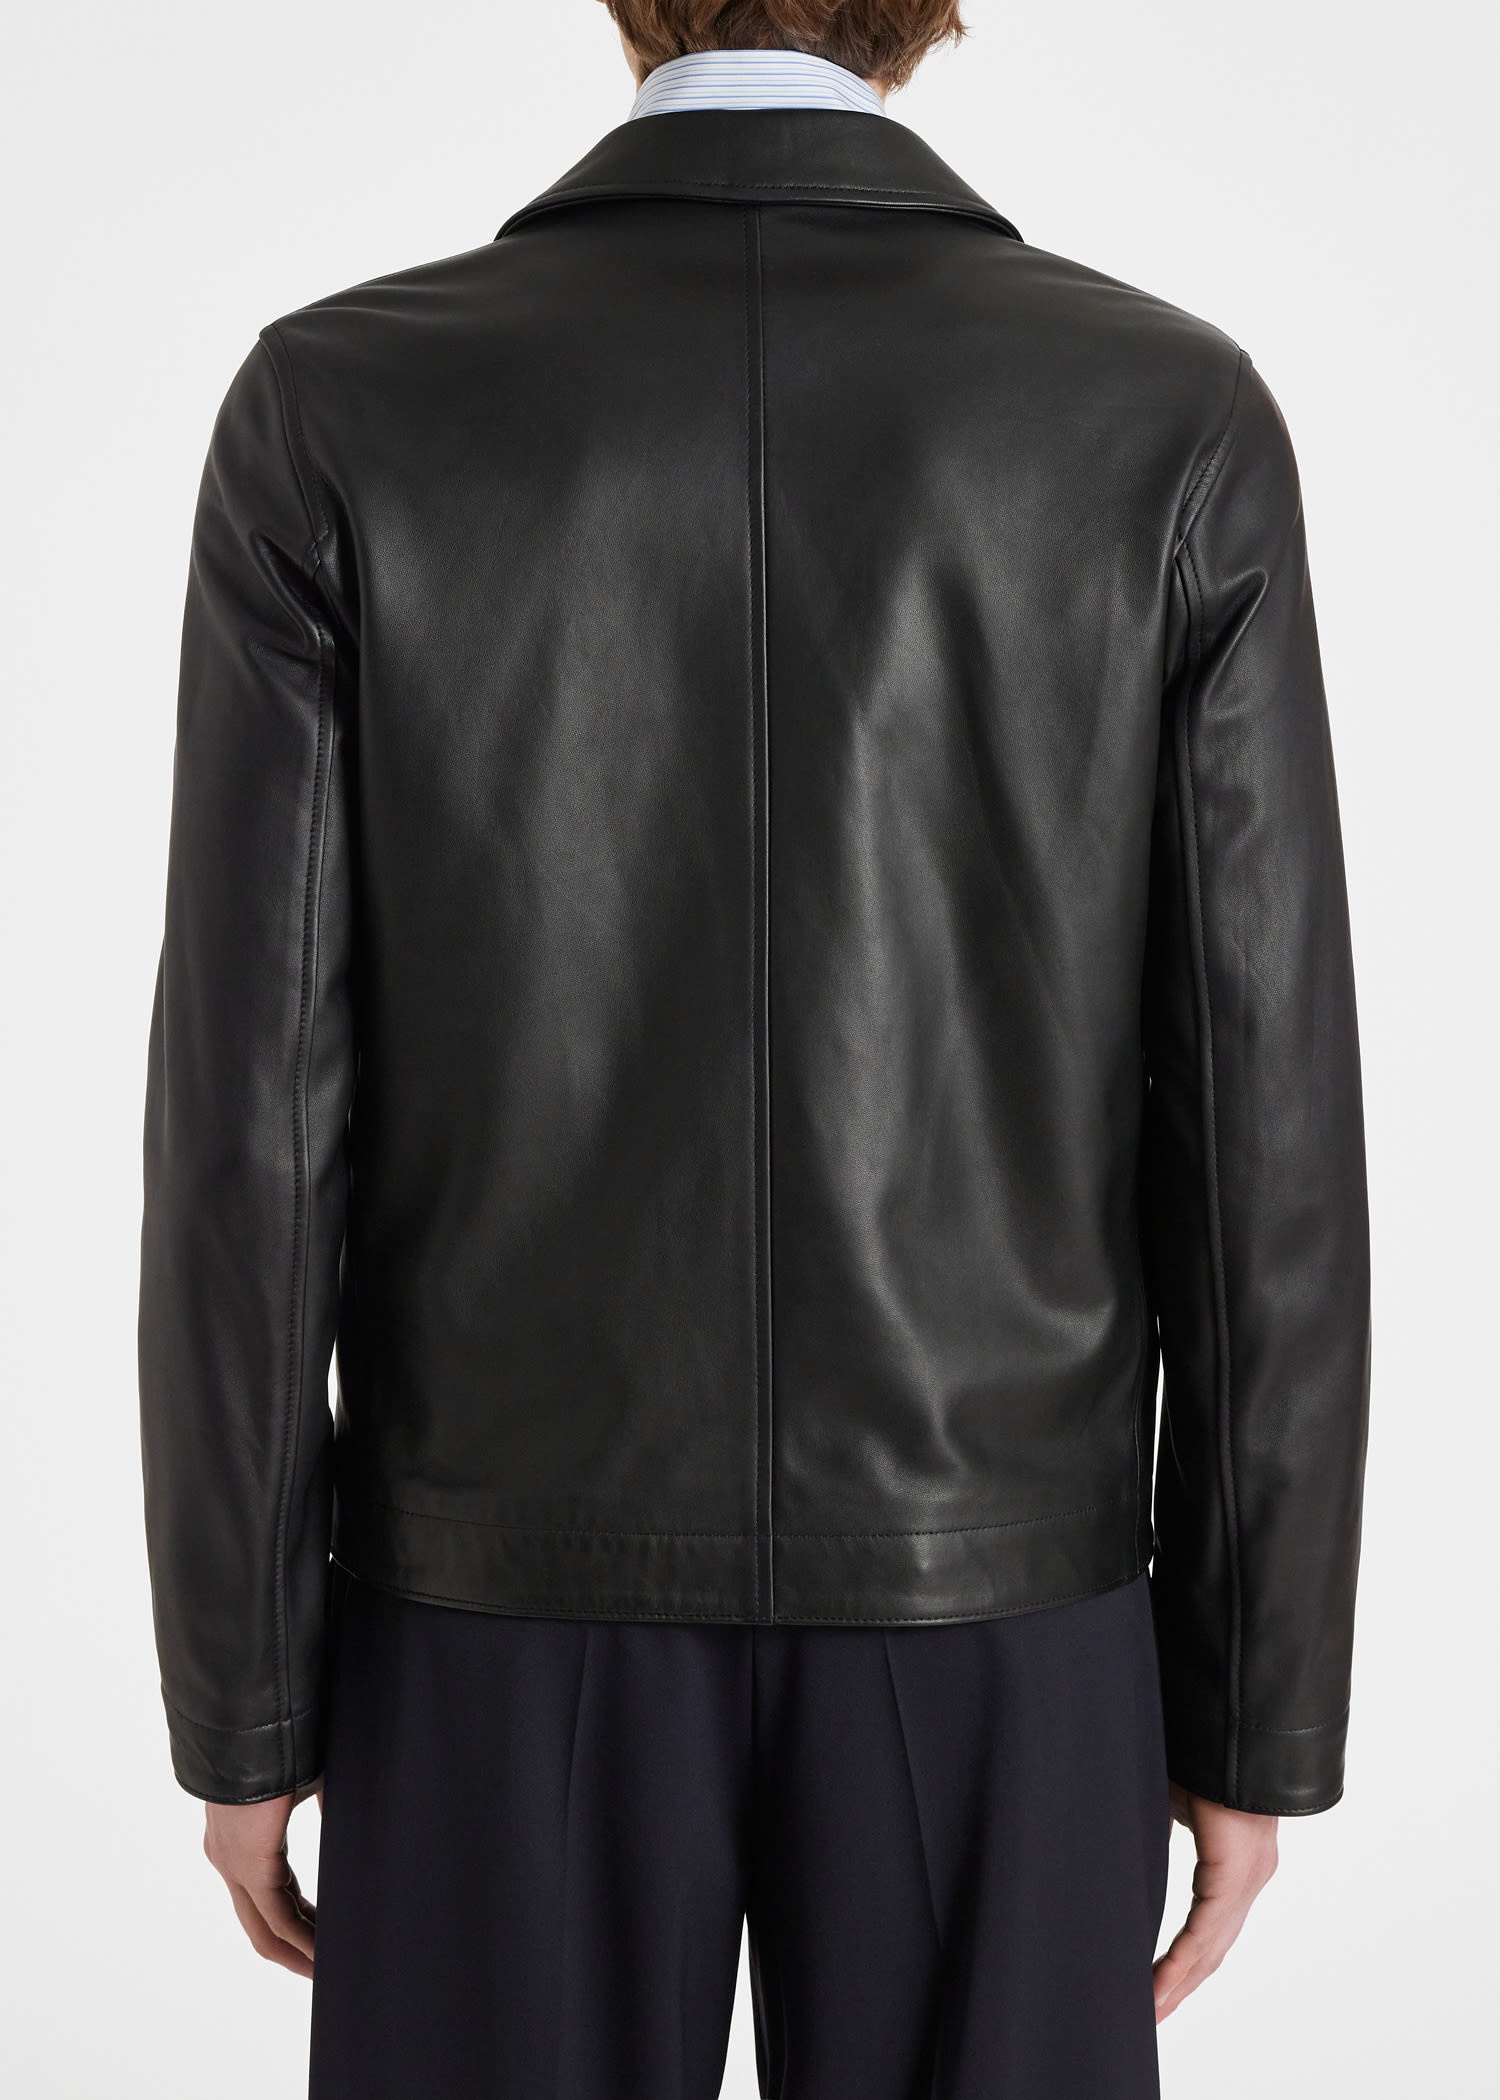 Paul Smith Zip-Front Leather Jacket | REVERSIBLE